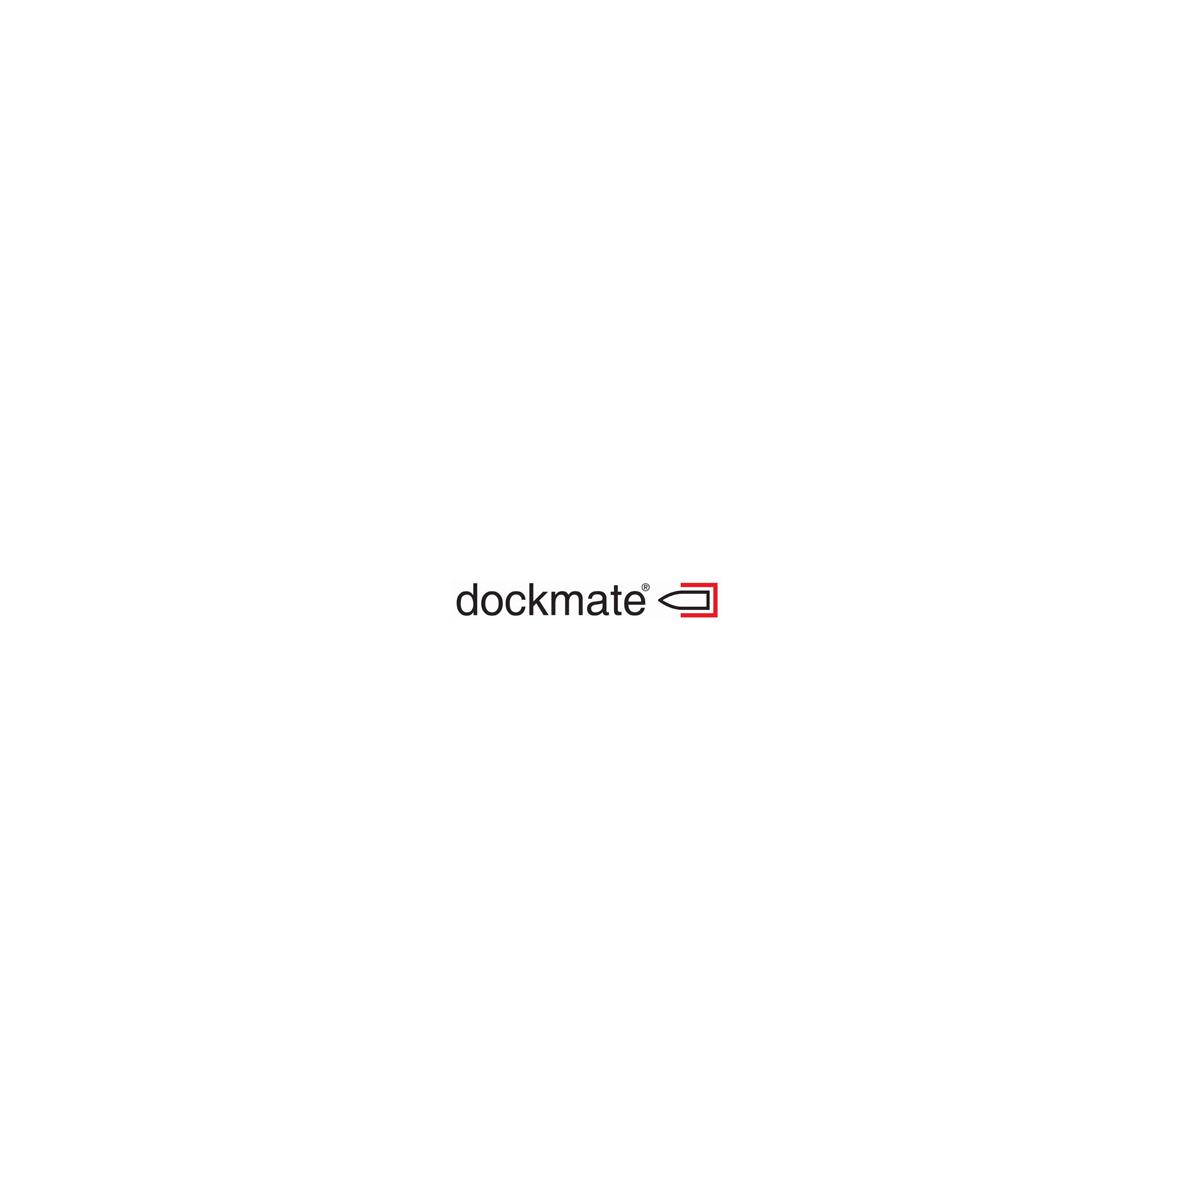 Dockmate Direct 5 star review on 25th April 2019